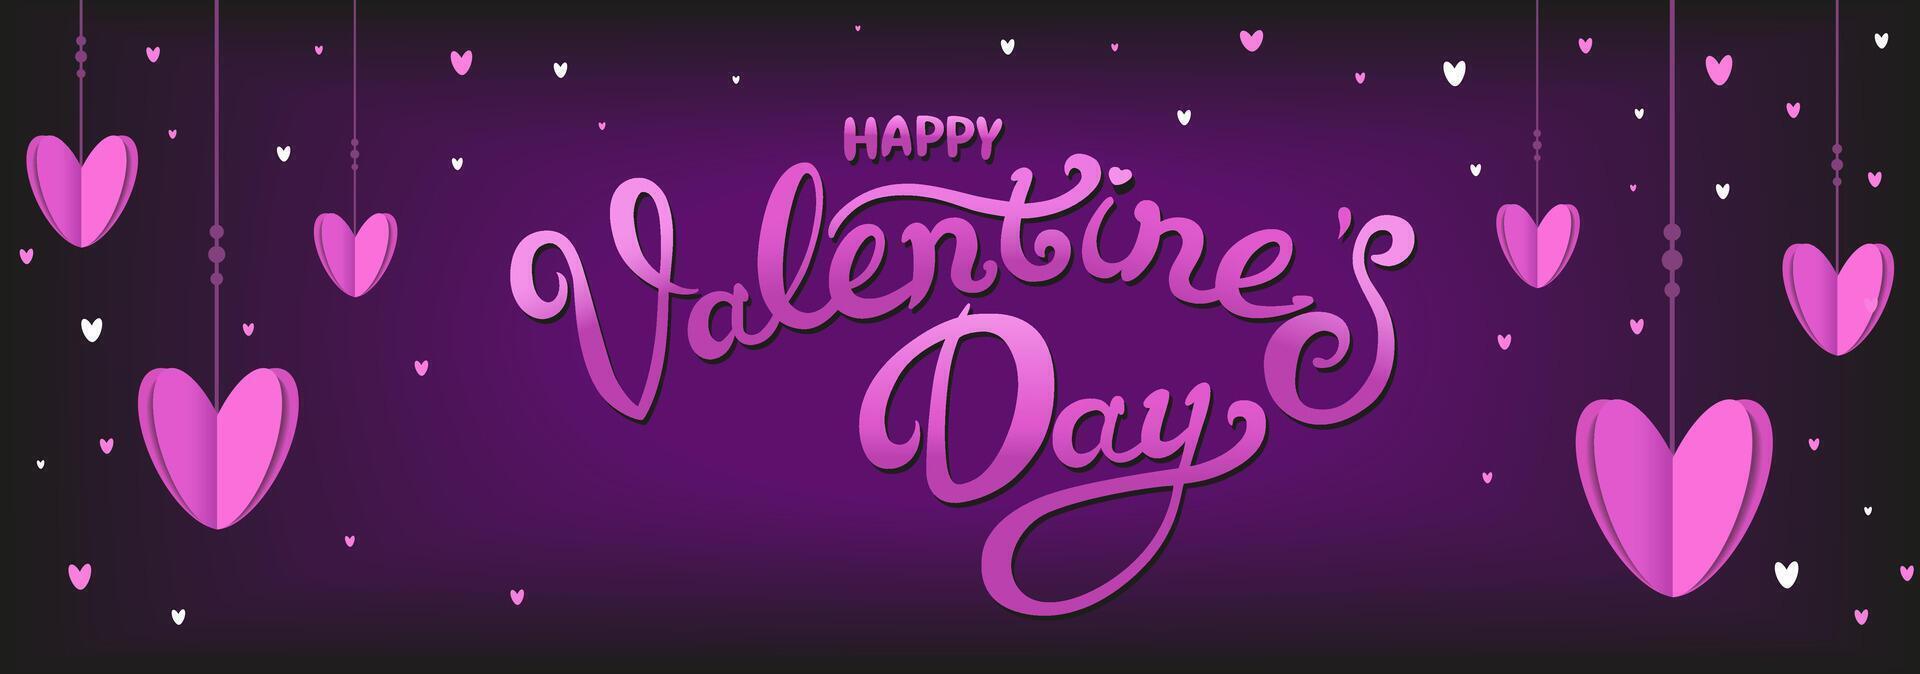 Vector Hanging hearts with text by Valentine day. Cute lettering. Black violet background in flat style. For greeting card, logo, sale, product, design